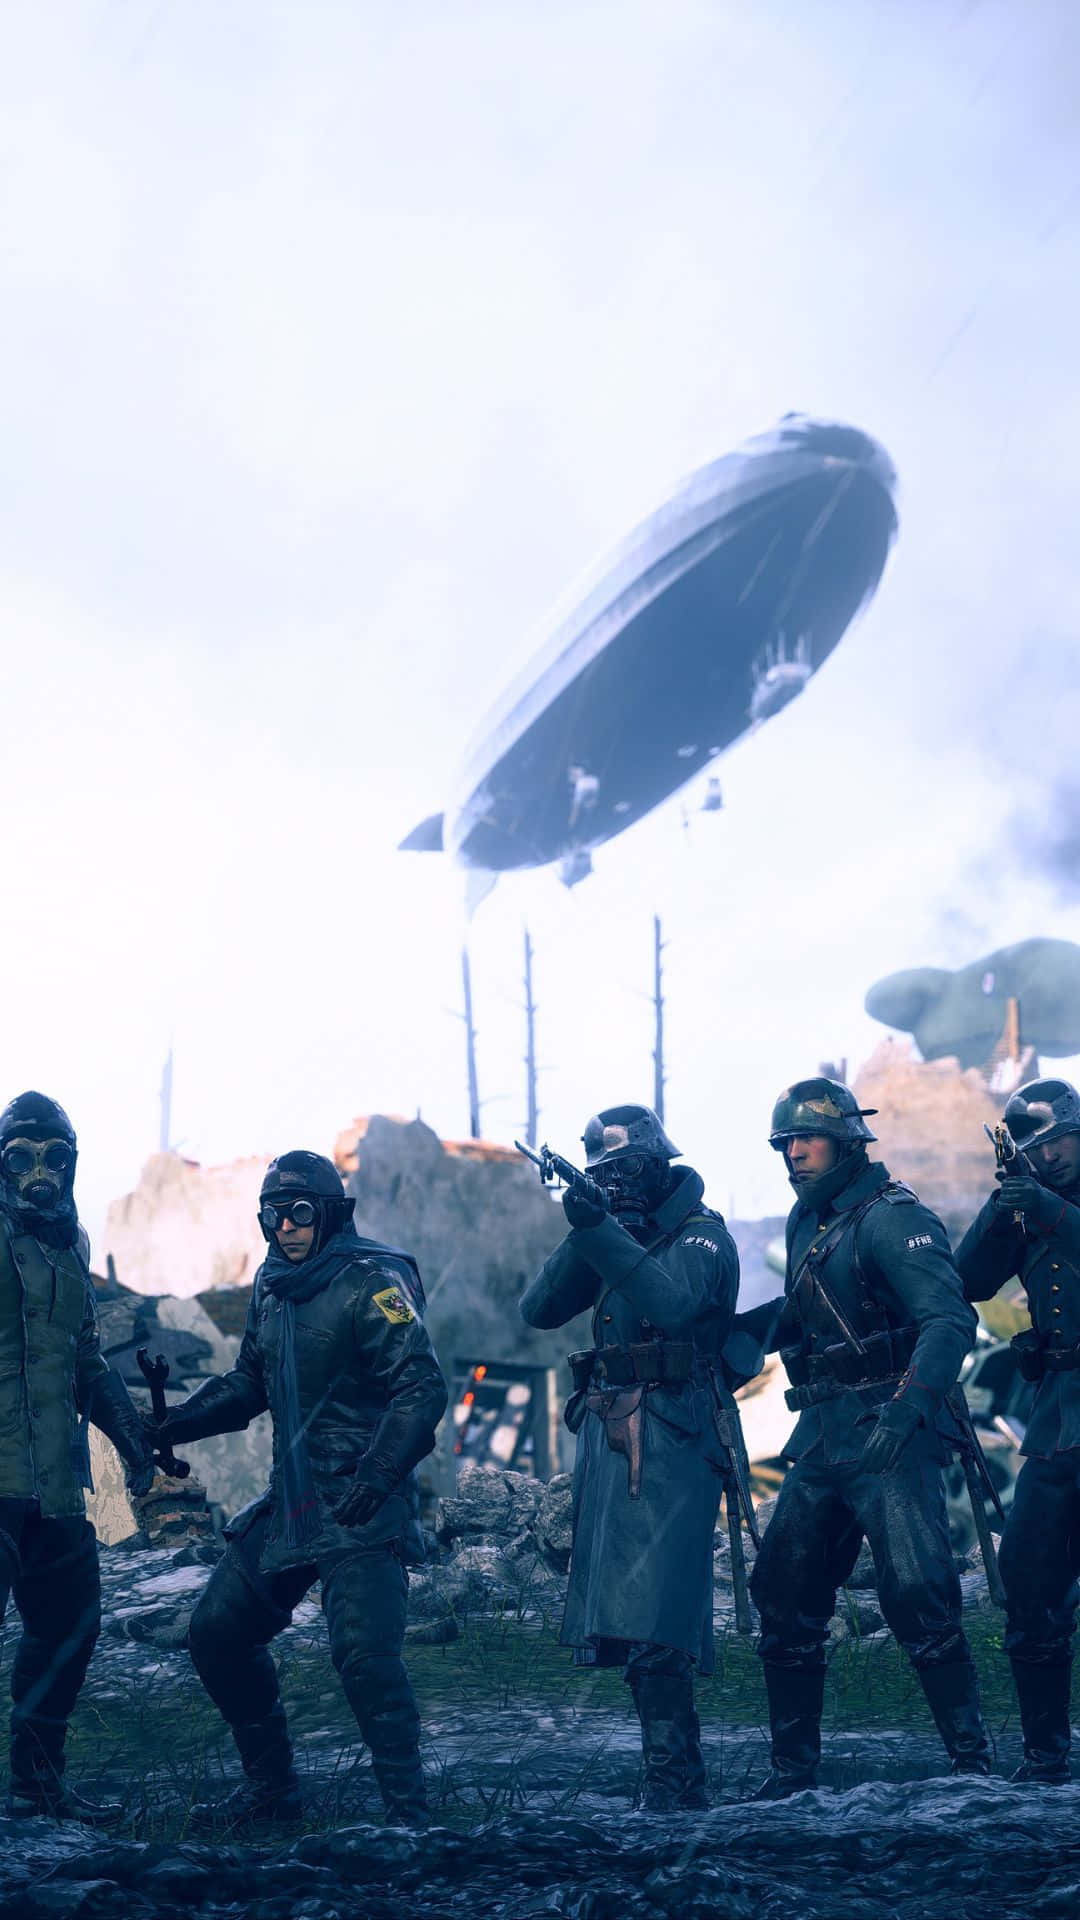 Android Battlefield 1 Background Soldiers And A Blimp